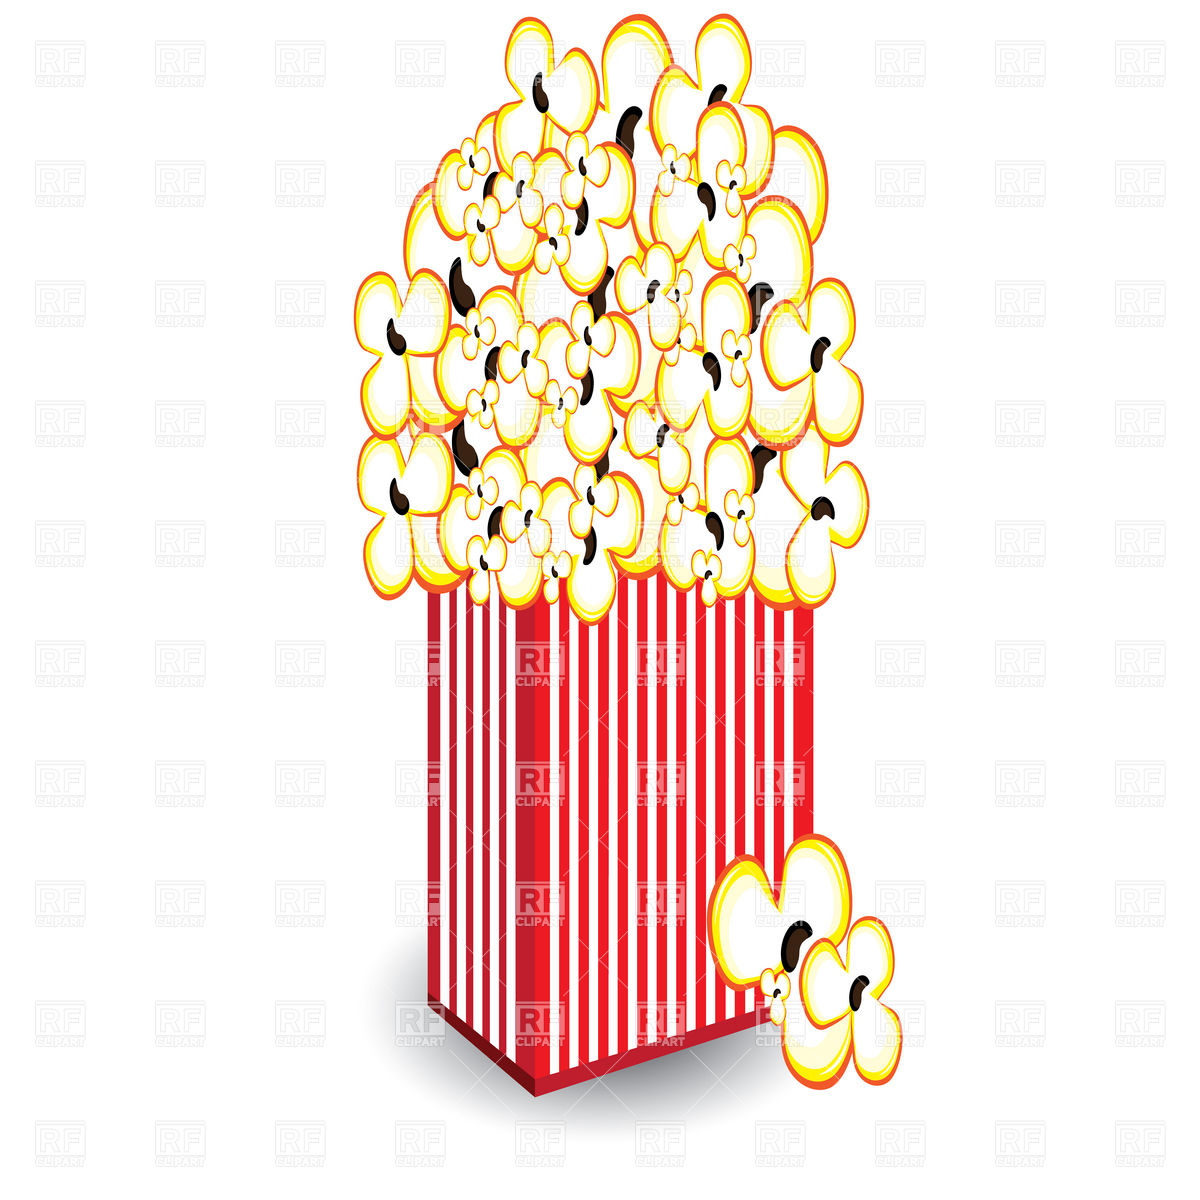 Pack Of Popcorn 7100 Food And Beverages Download Royalty Free